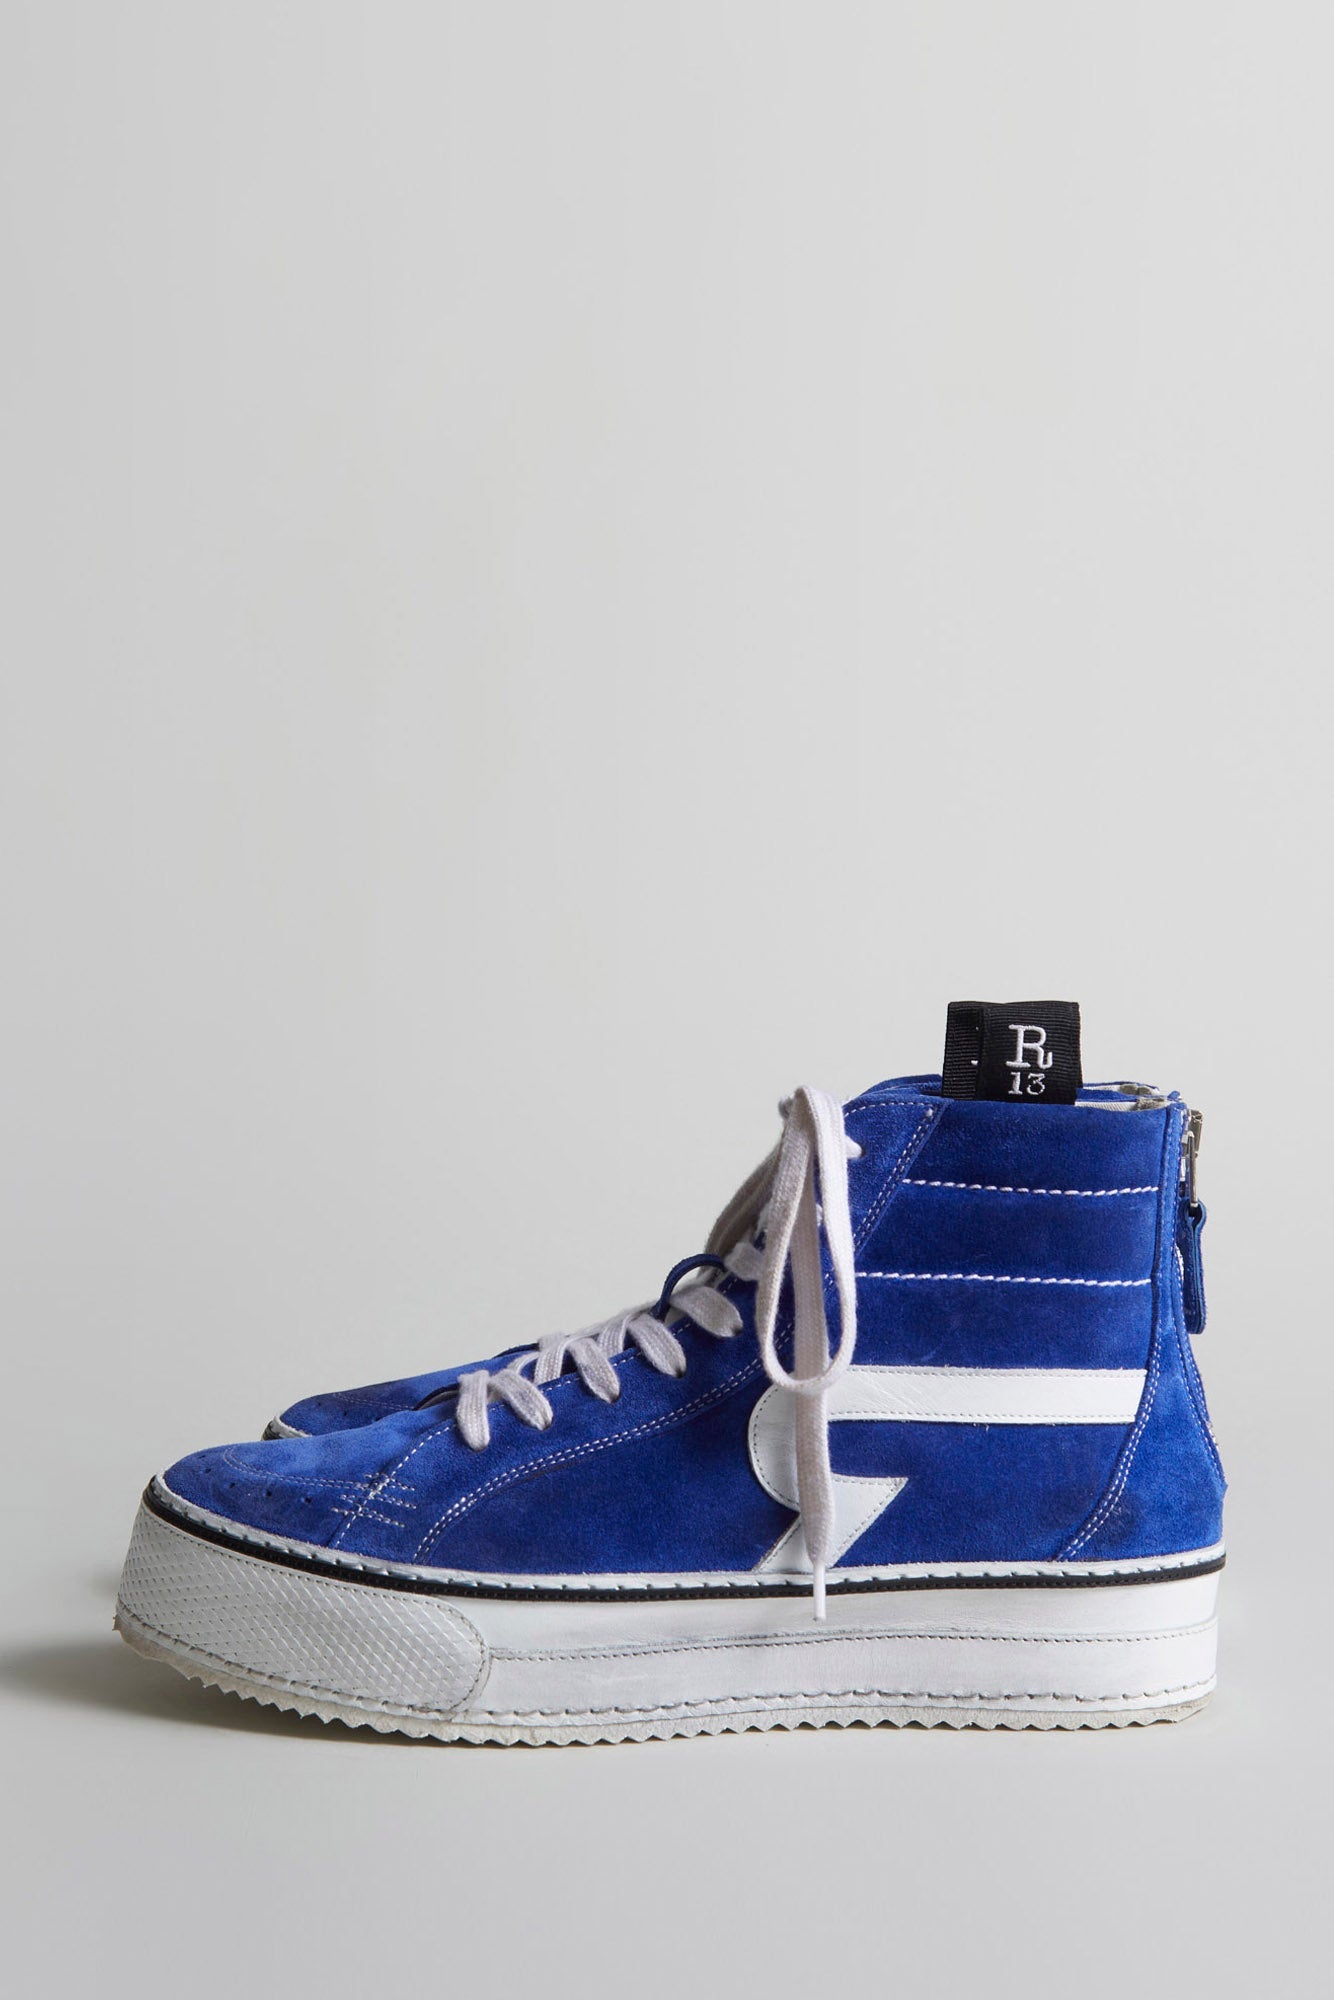 ROGUE HIGH TOP - BLUE SUEDE